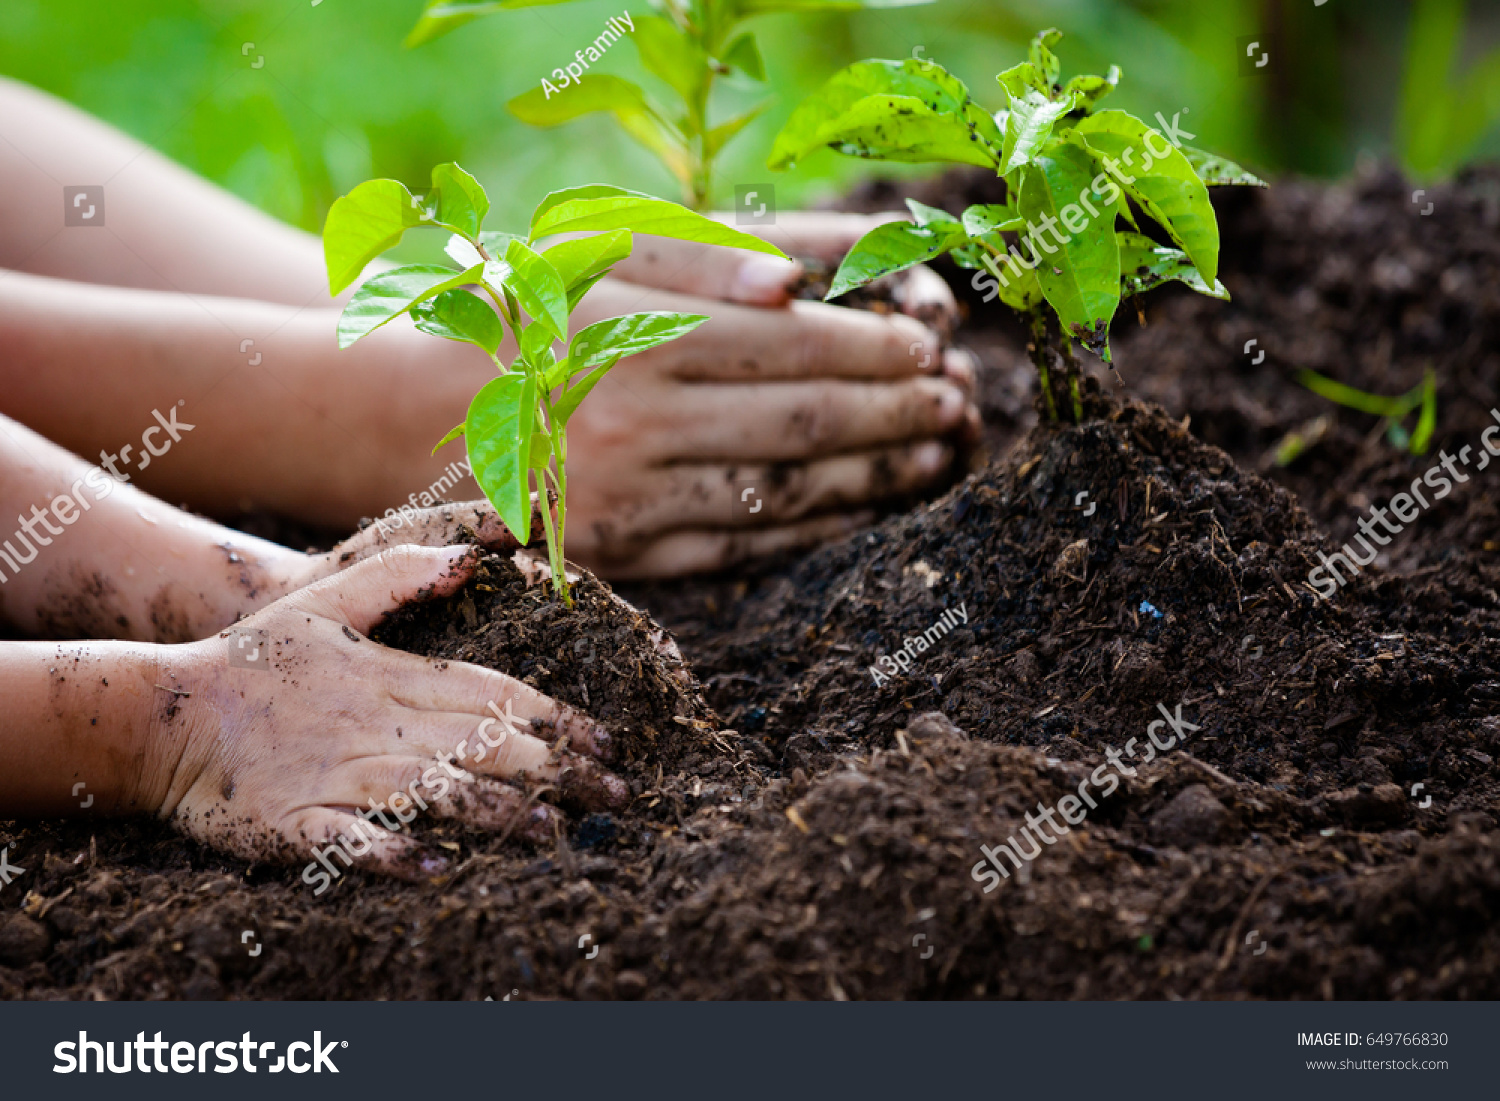 Child and parent hand planting young tree on black soil together as save world concept #649766830